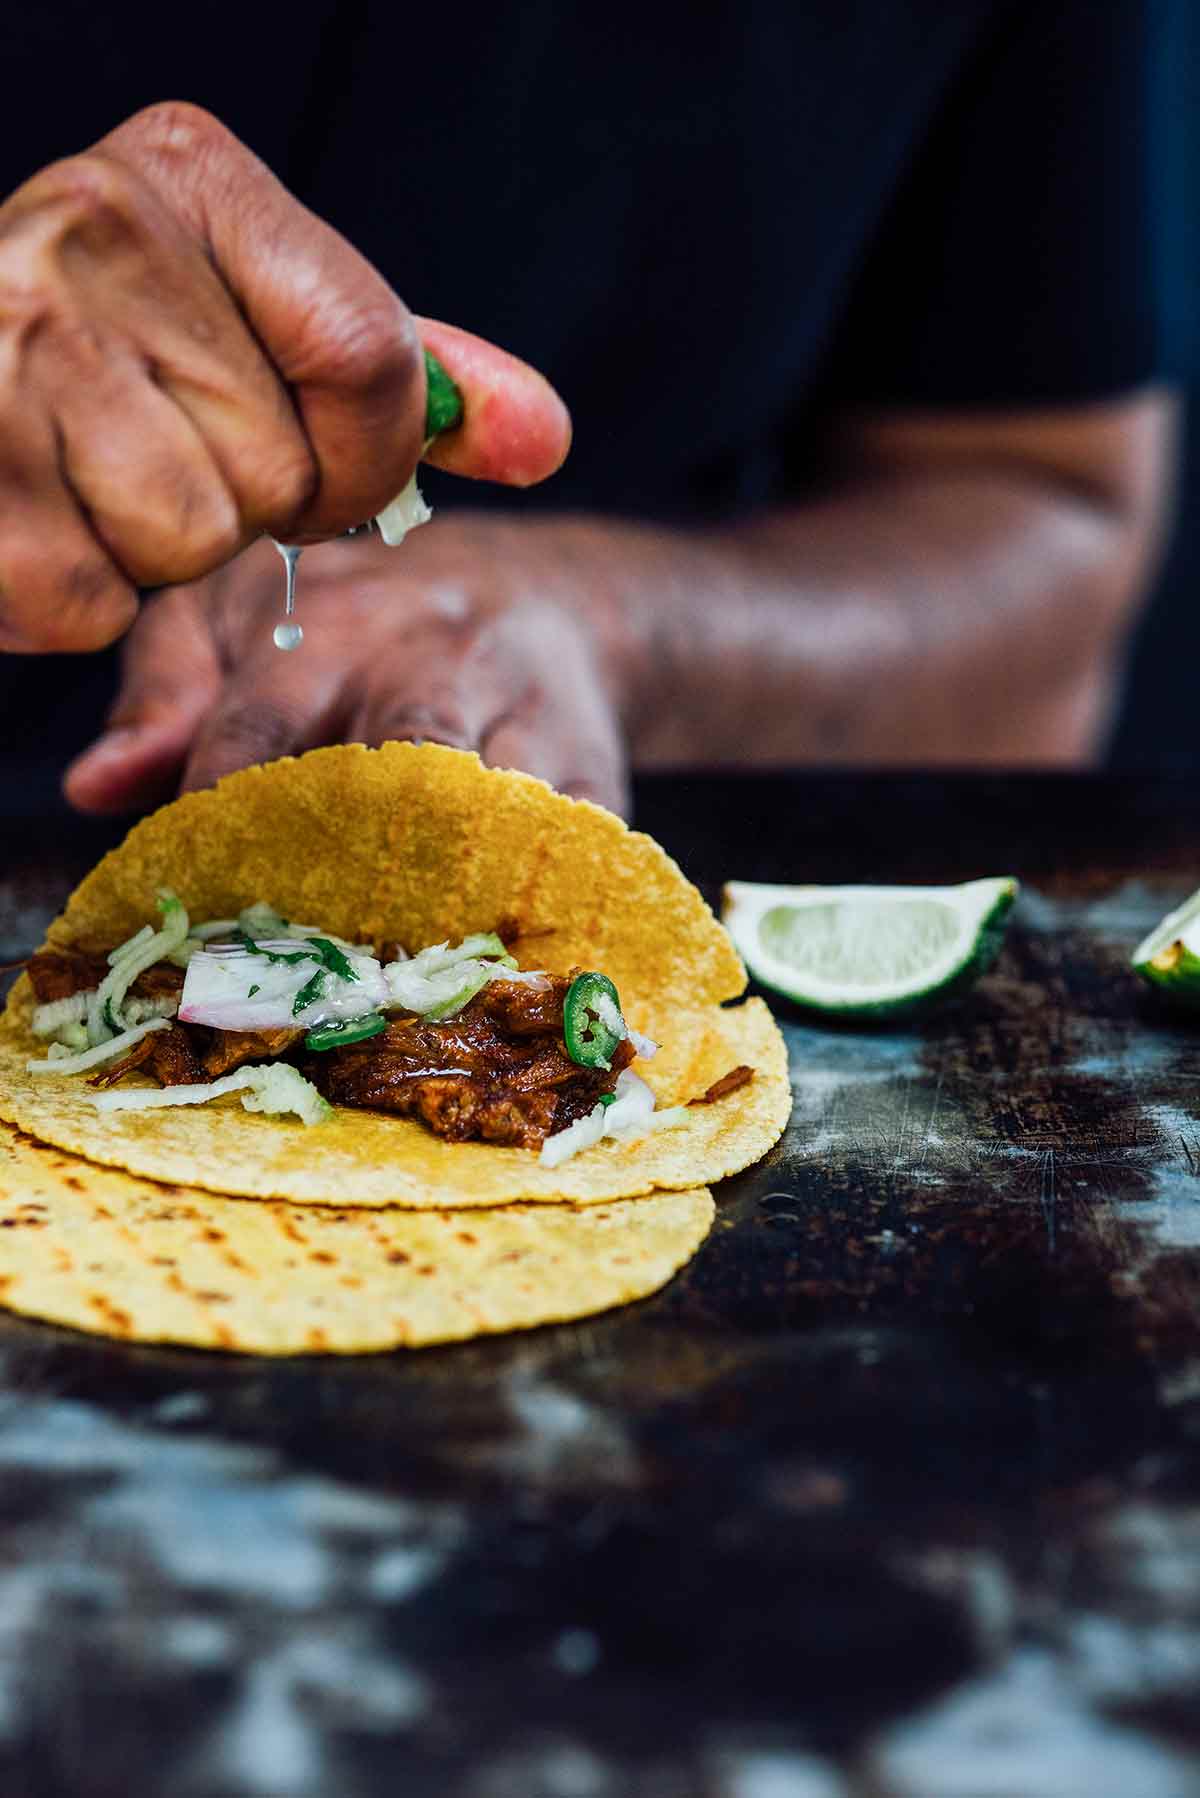 A person squeezing lime juice over an open pulled pork taco.